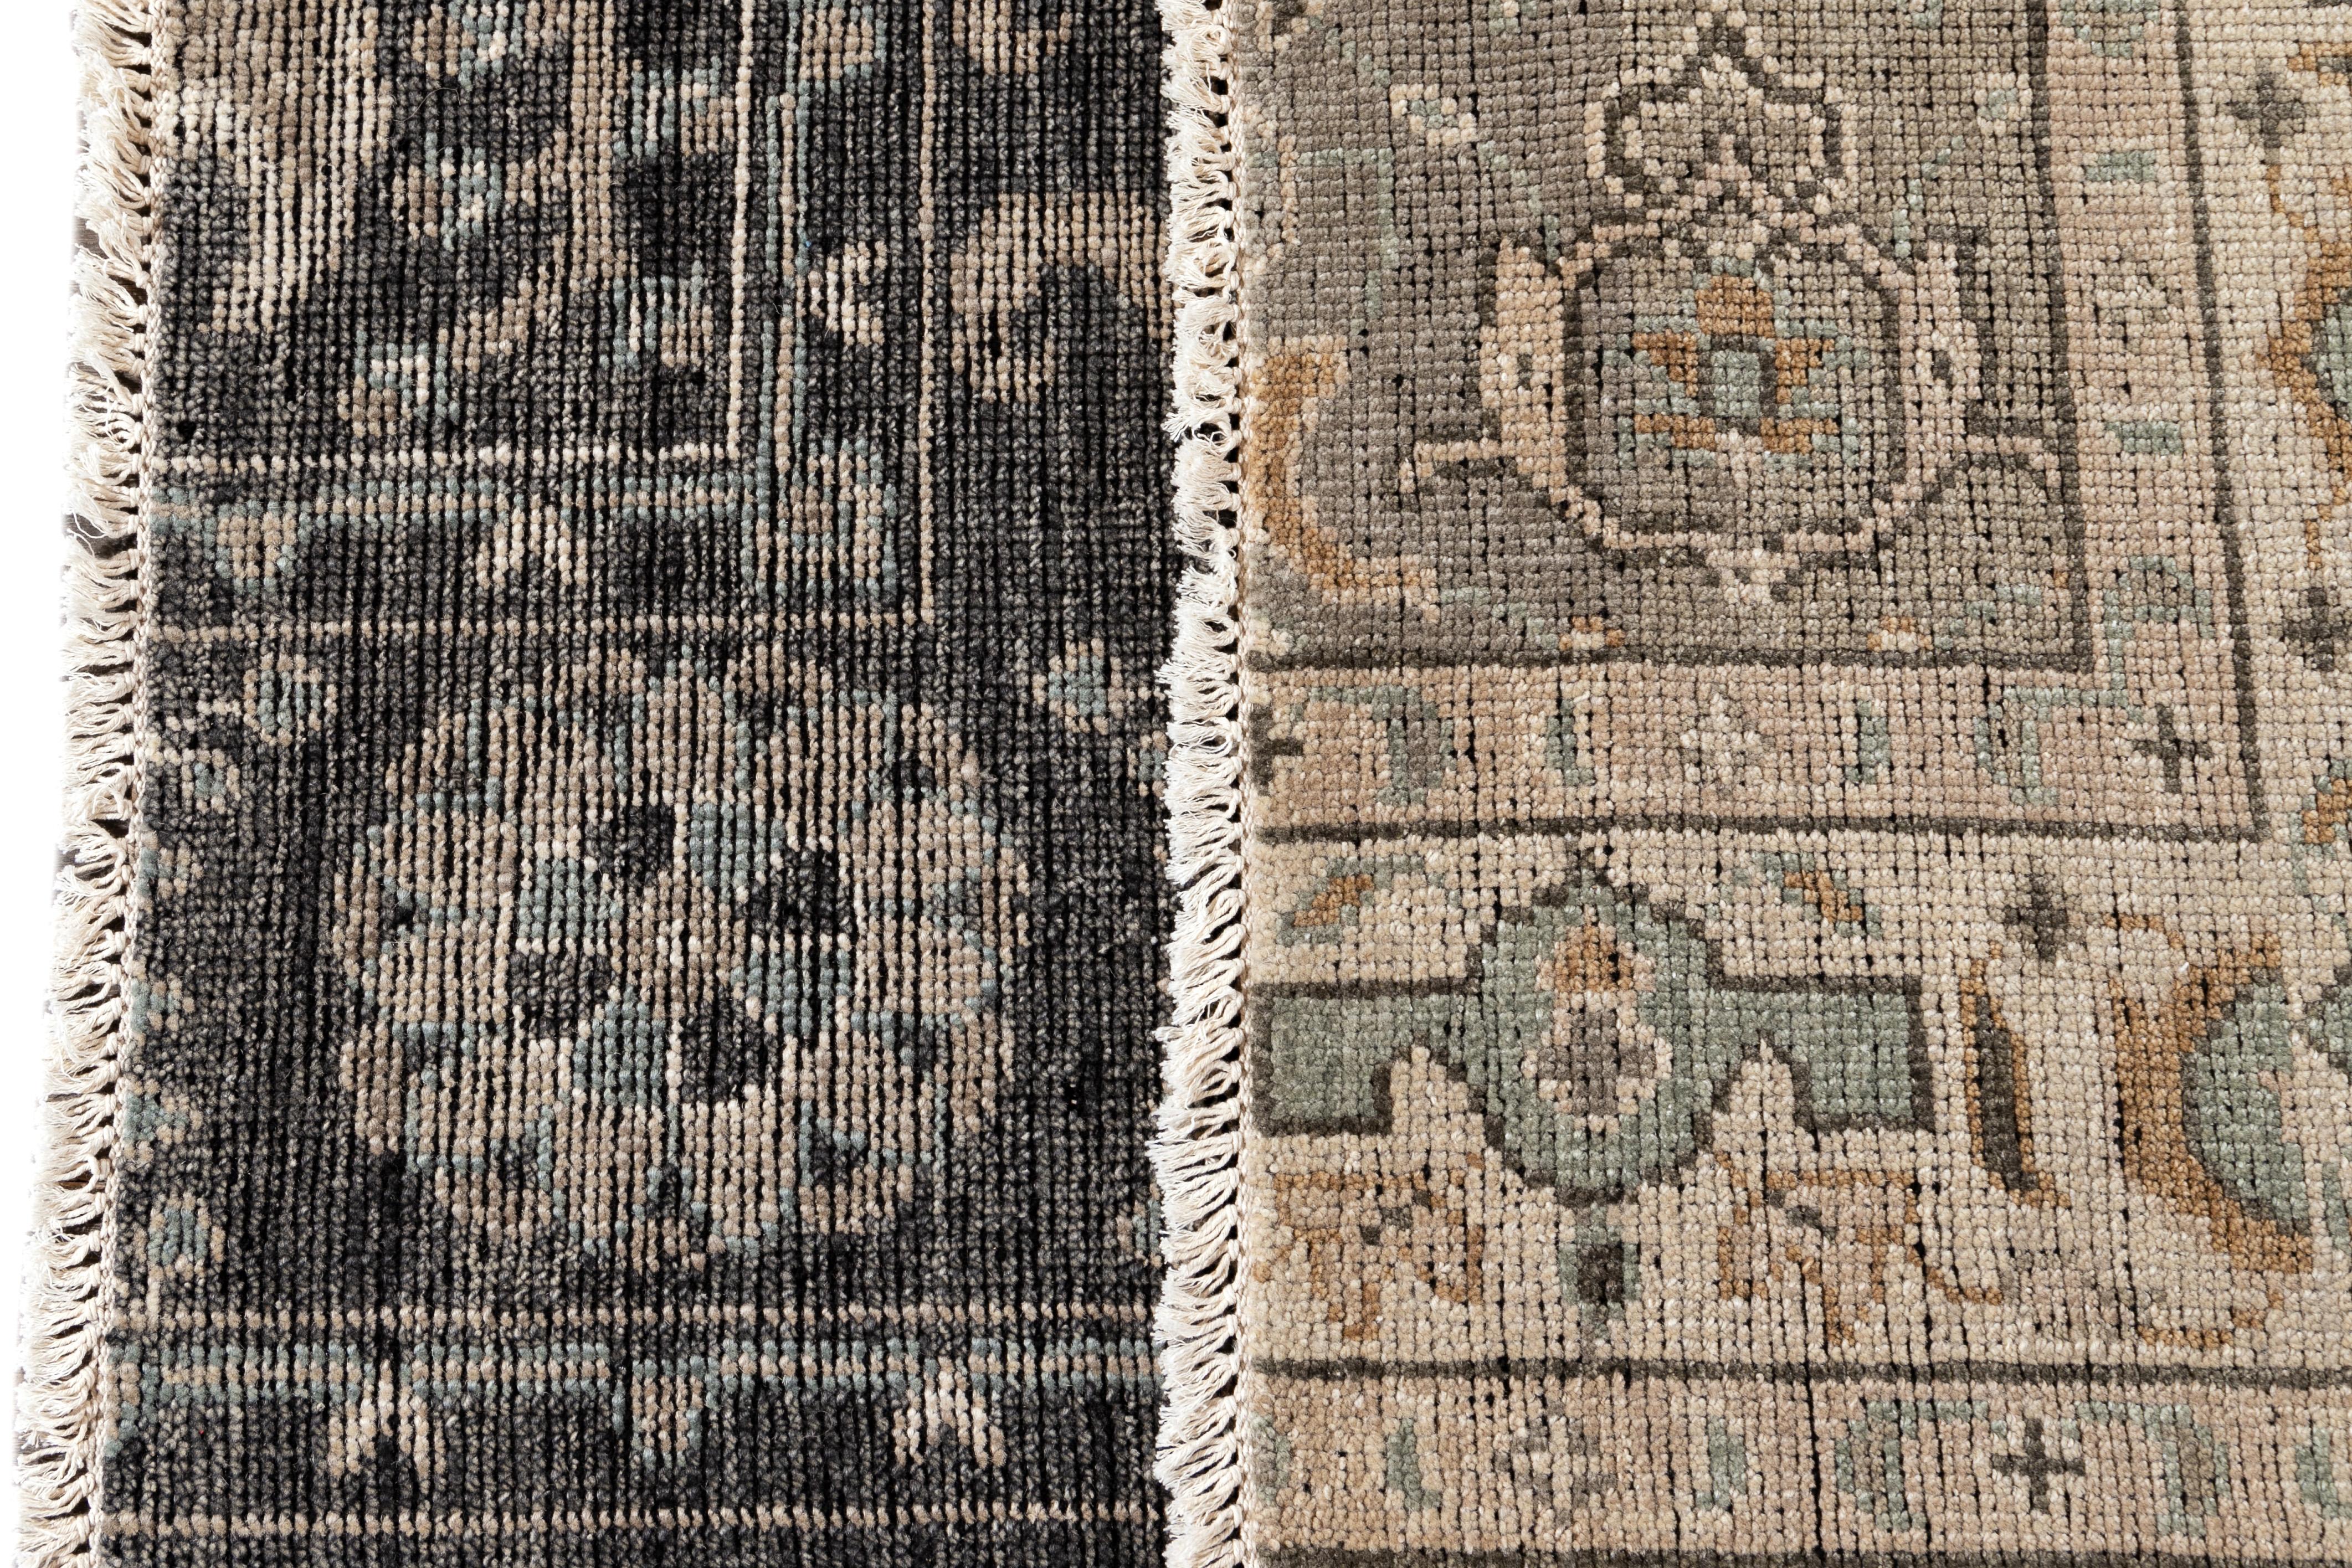 Hand knotted wool Oushak-style custom rug. Custom sizes and colors made-to-order.

Material: Hand knotted Wool
Lead time: Approximate 12 wks
Available colors: As shown; other custom colors and styles available.
Made in India.